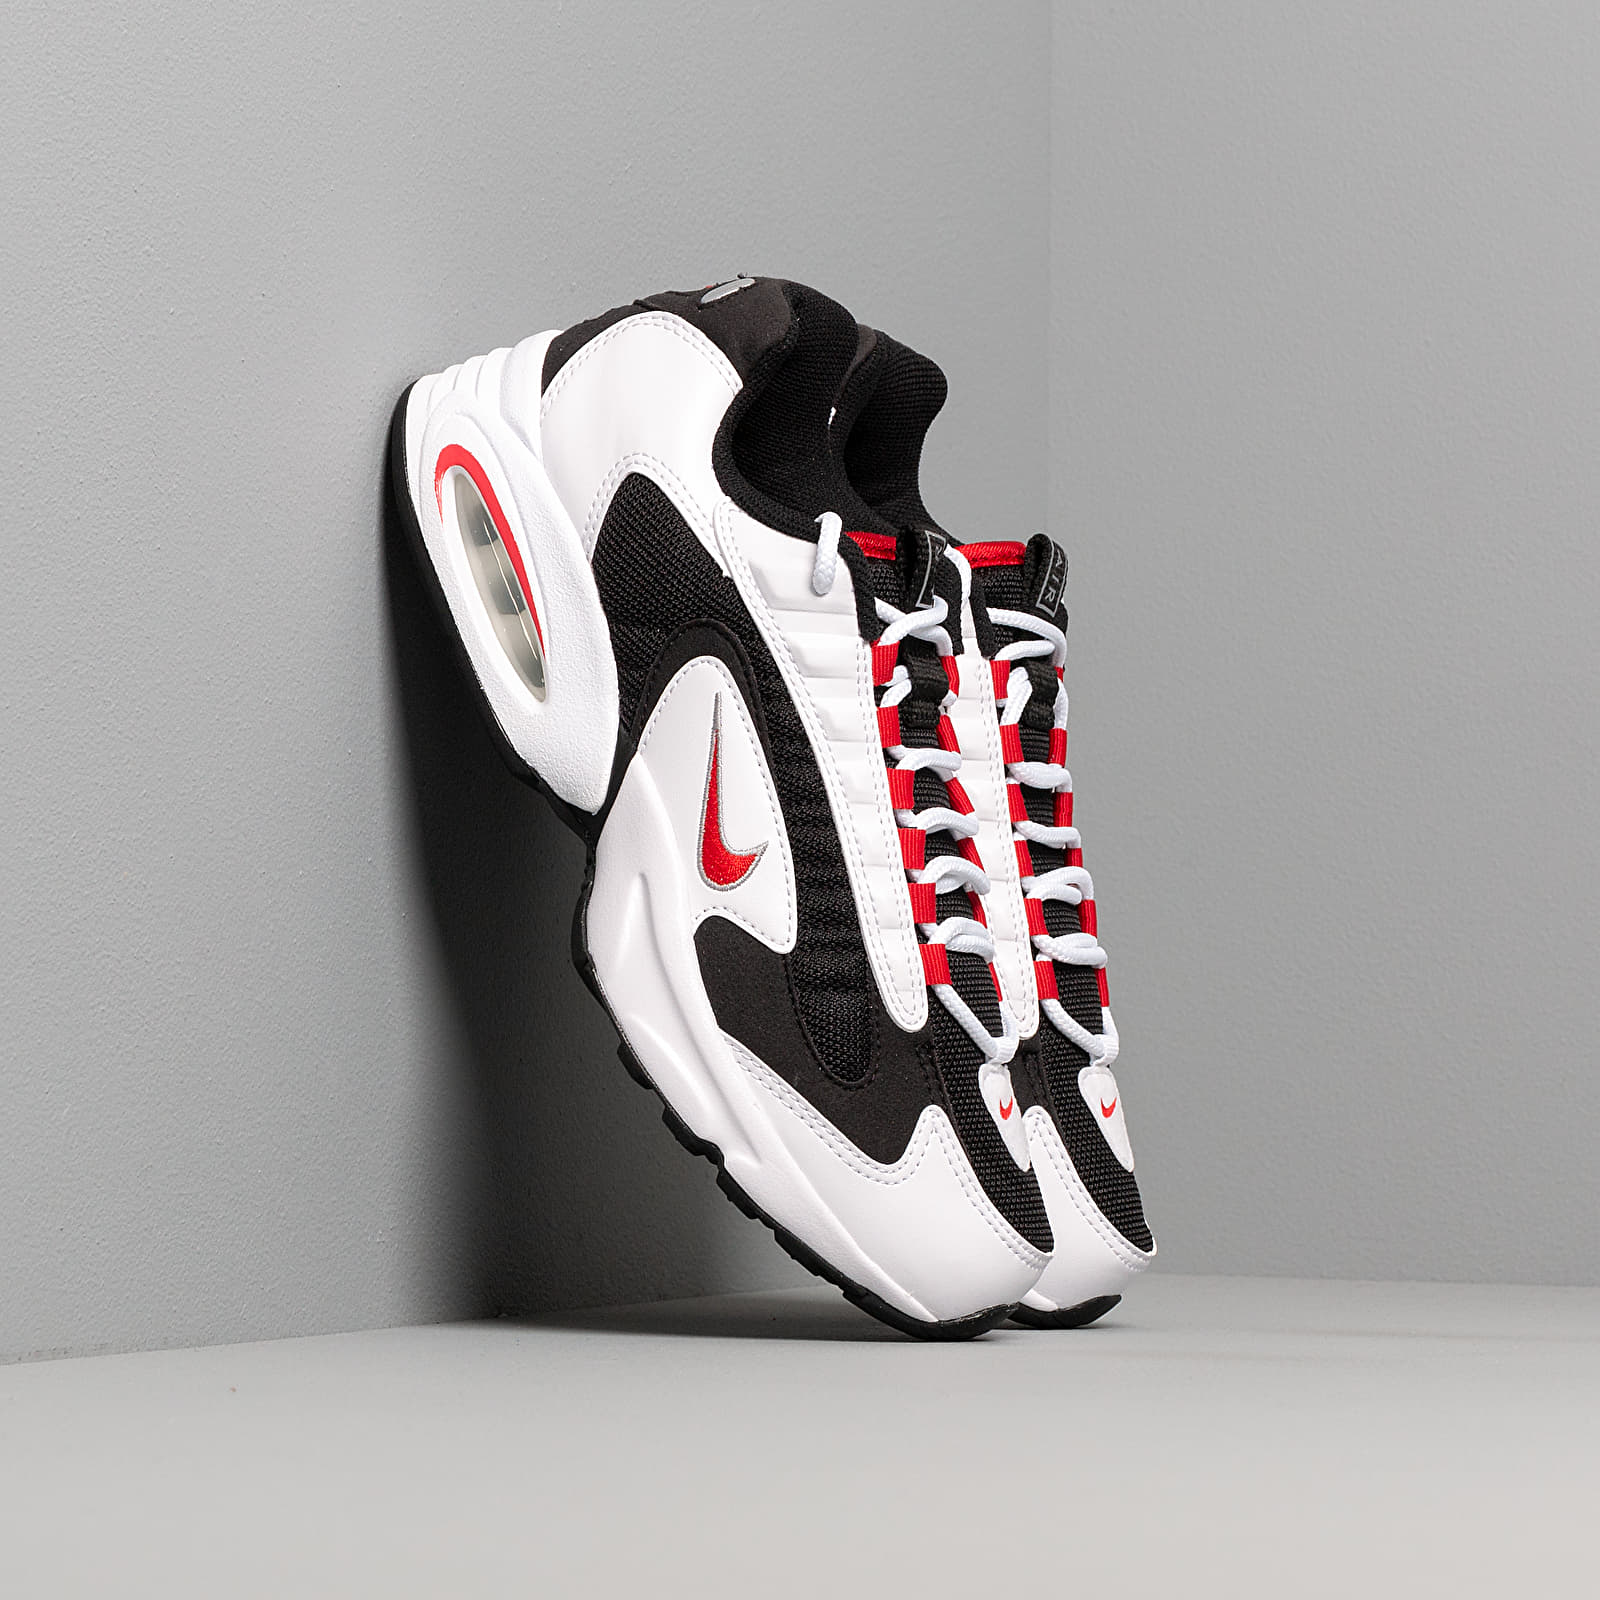 Chaussures et baskets homme Nike Air Max Triax White/ University Red-Black-Silver